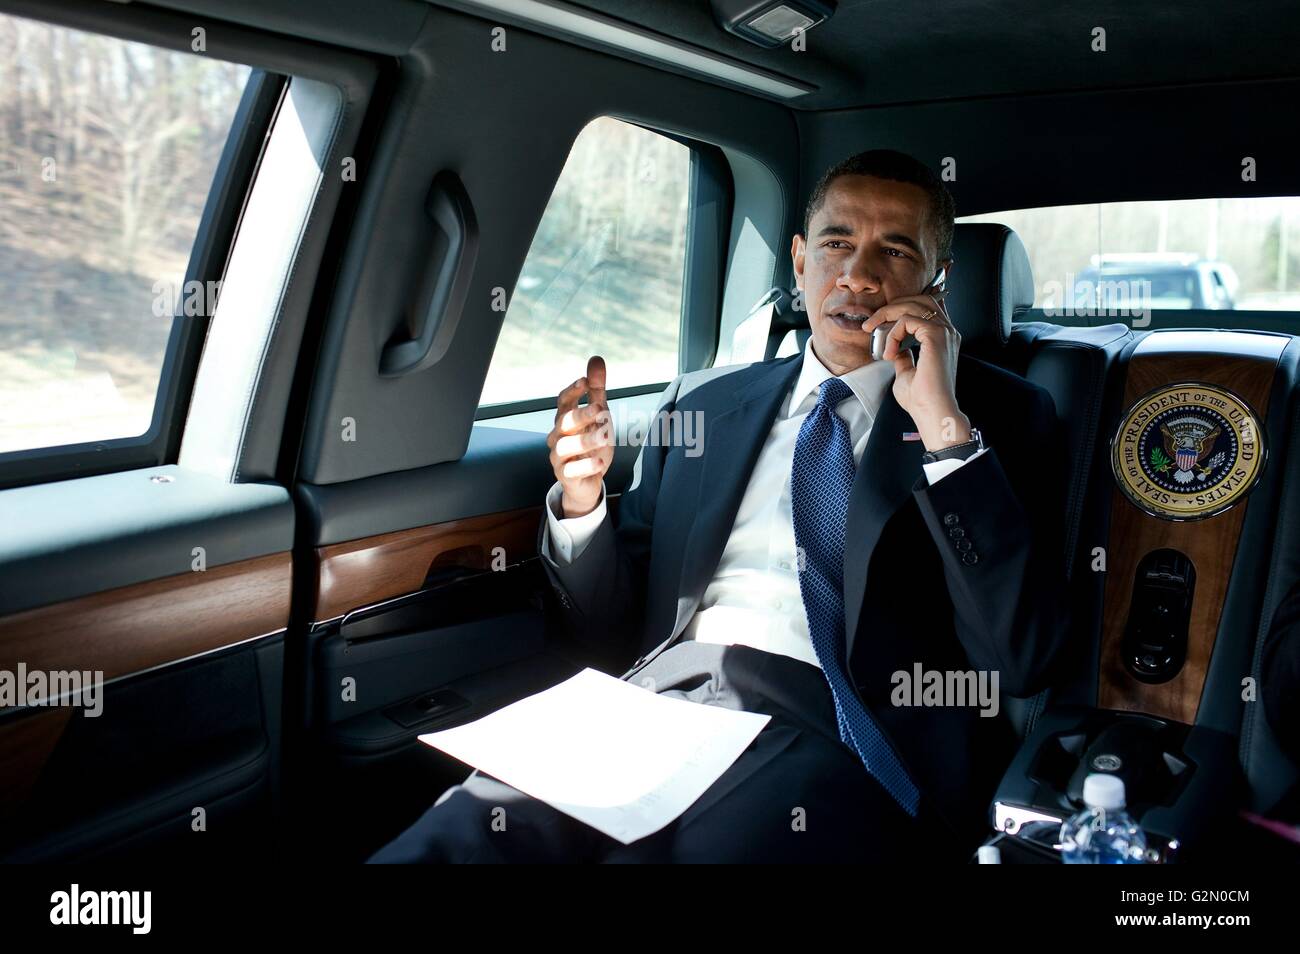 Barack Hussein Obama II (born August 4, 1961); 44th President of the United States, talks on a phone in the presidential limousine 2013. Stock Photo